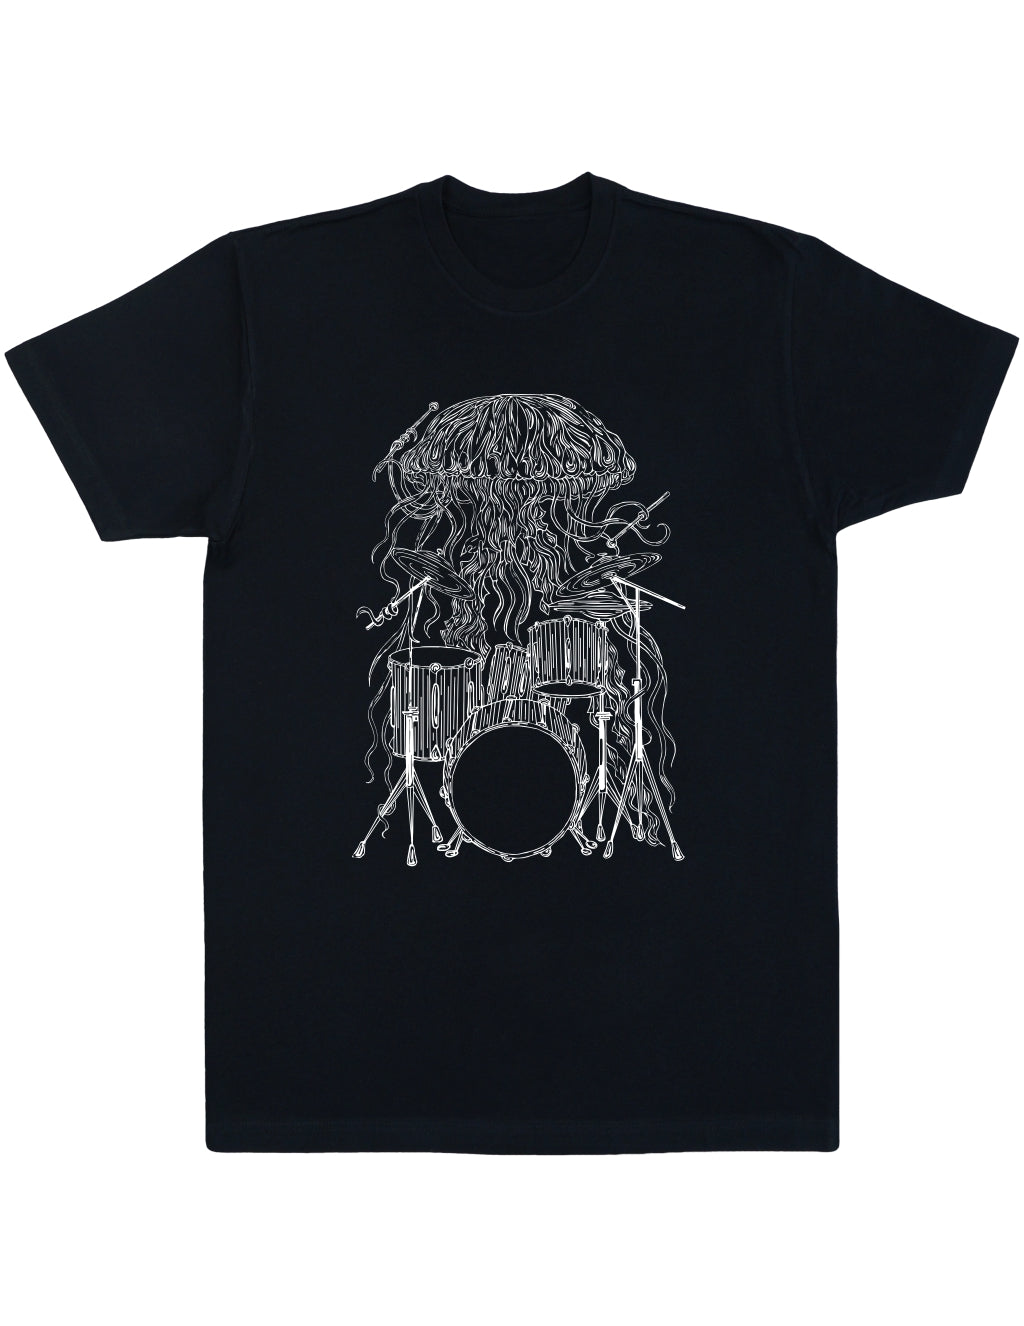 SEEMBO Jellyfish Playing Drums Men's Cotton T-Shirt